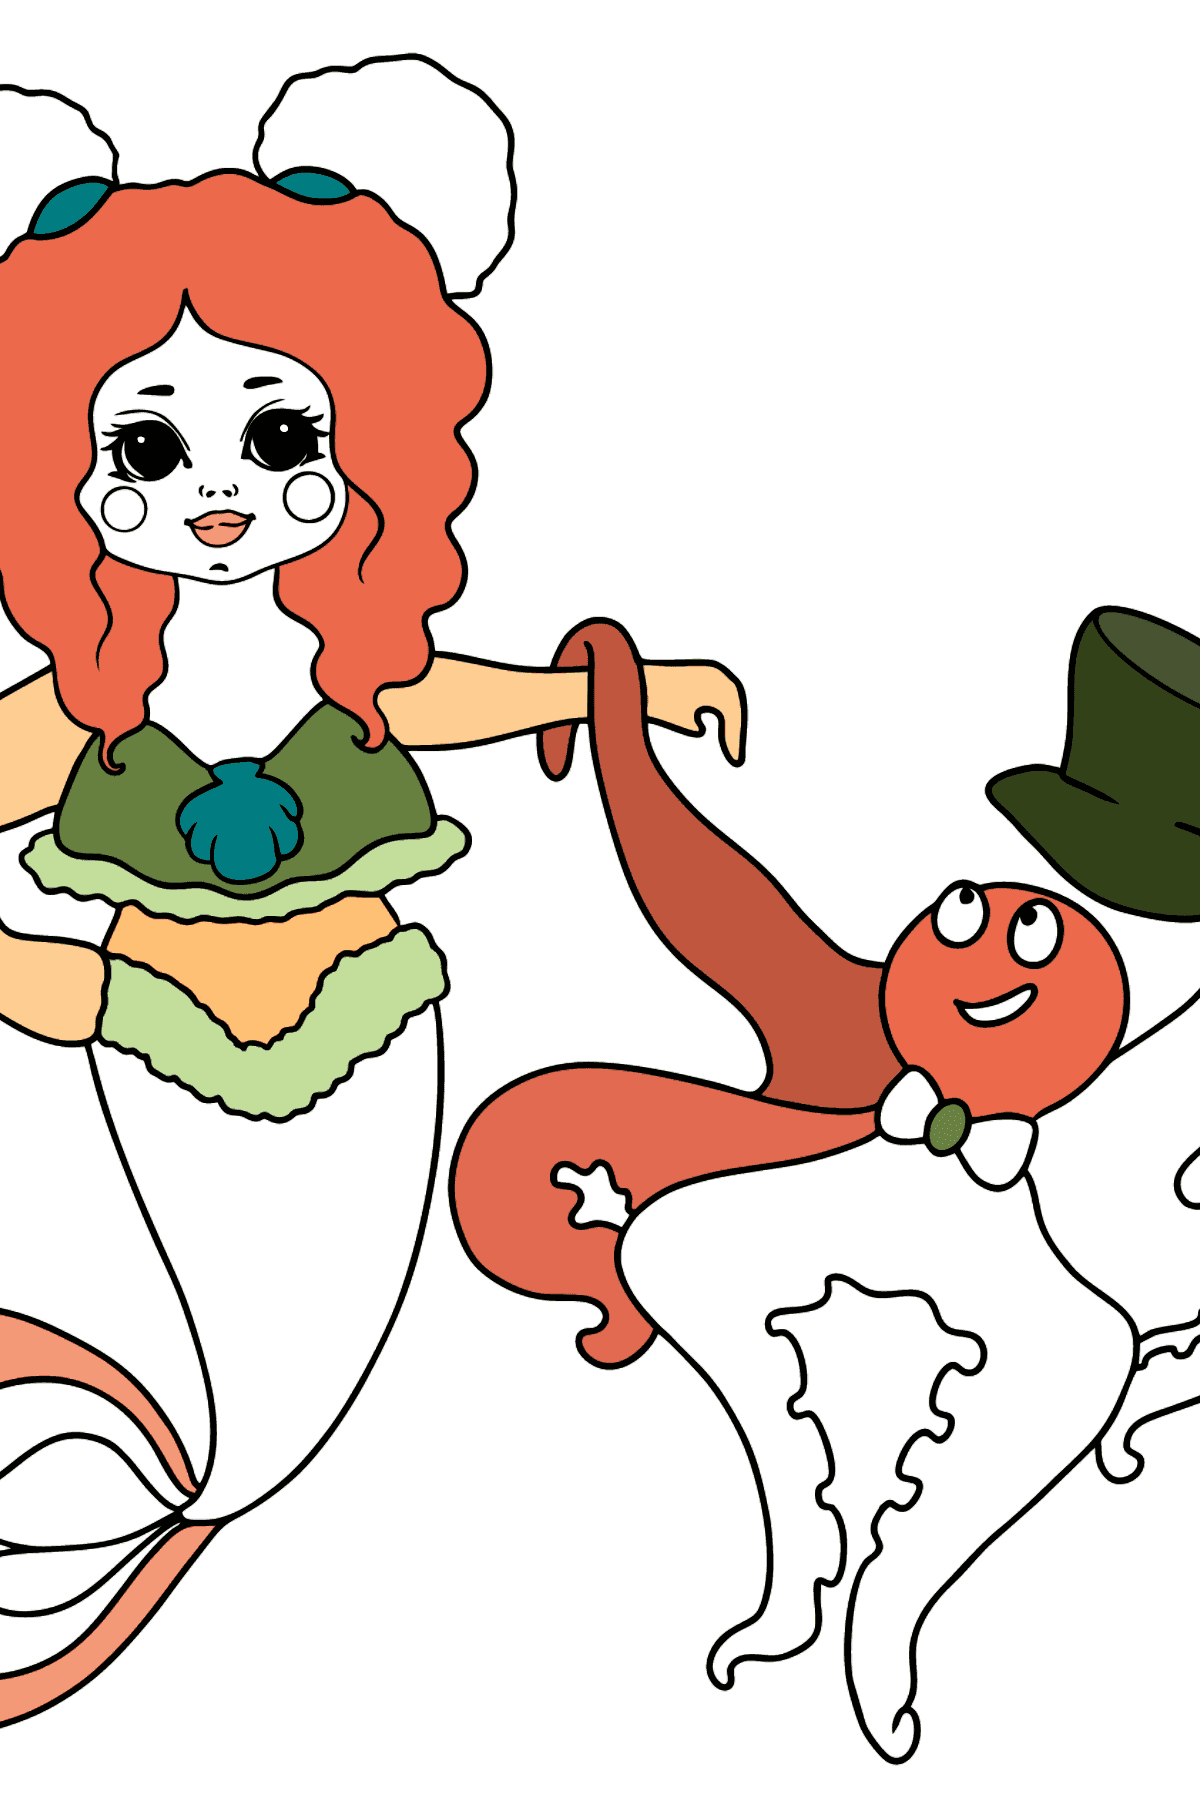 Mermaid and Octopus coloring page - Coloring Pages for Kids